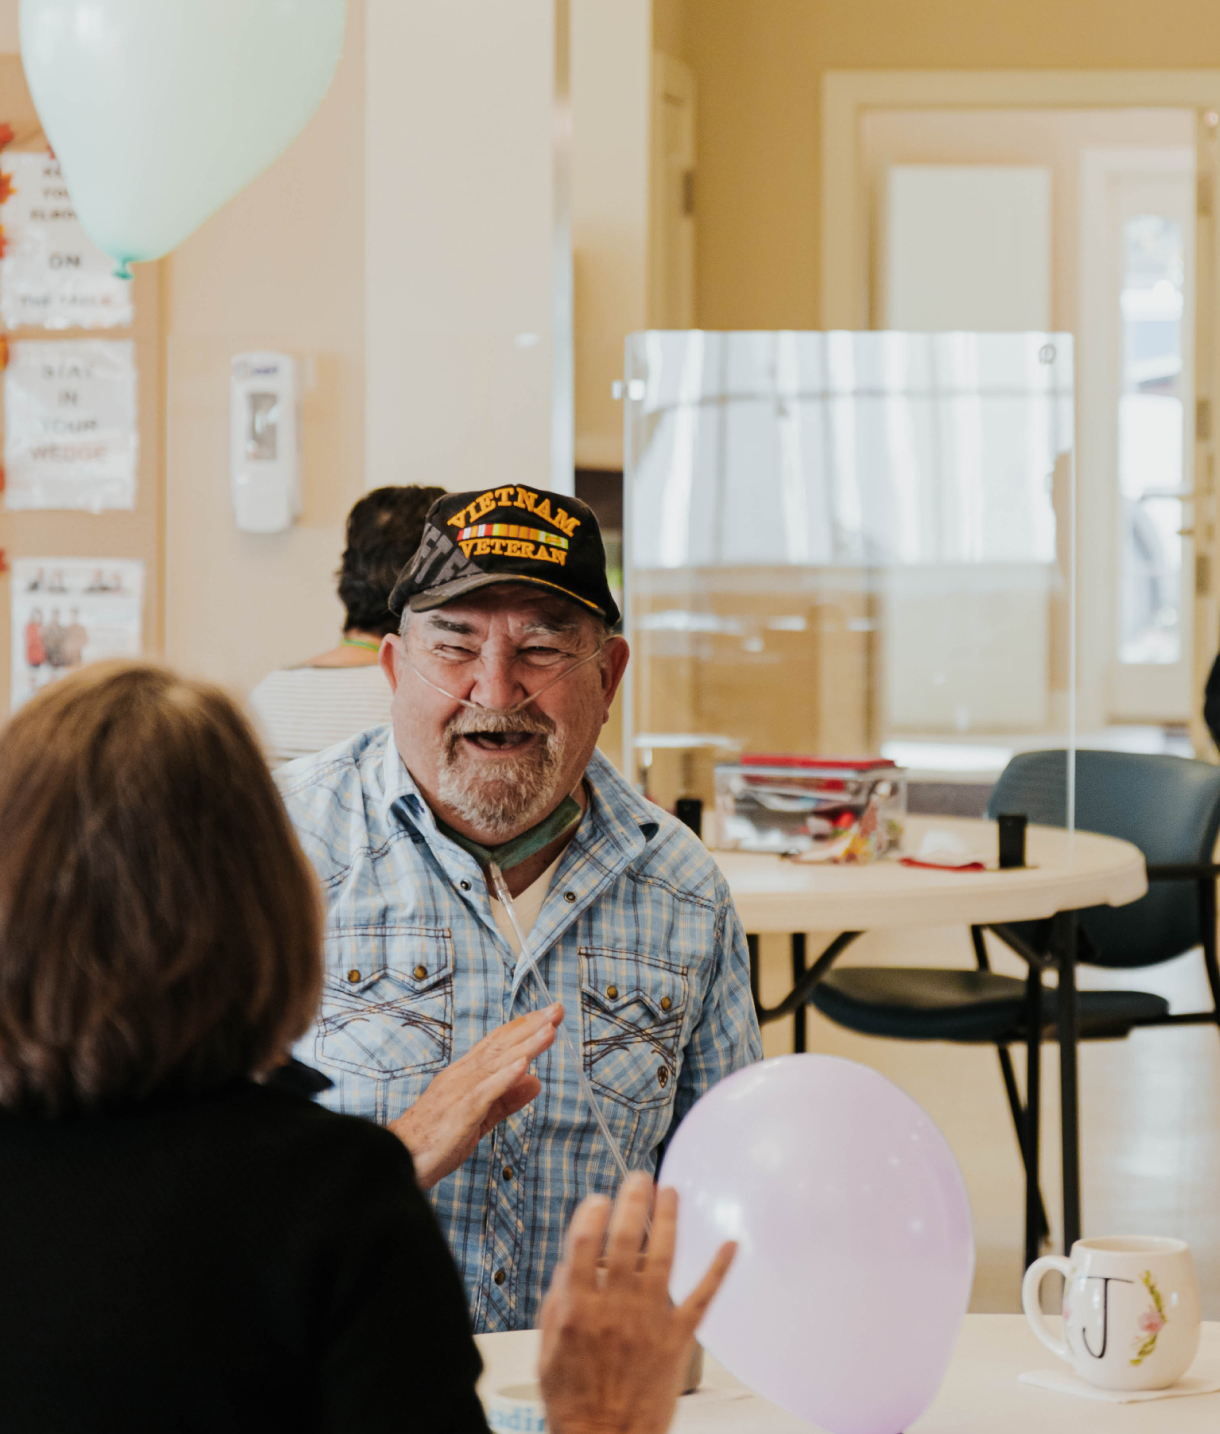 A bearded man with a Vietnam Veteran baseball cap sits at a table facing a woman as a balloon floats above them while another ballon and coffee mug are on the table.